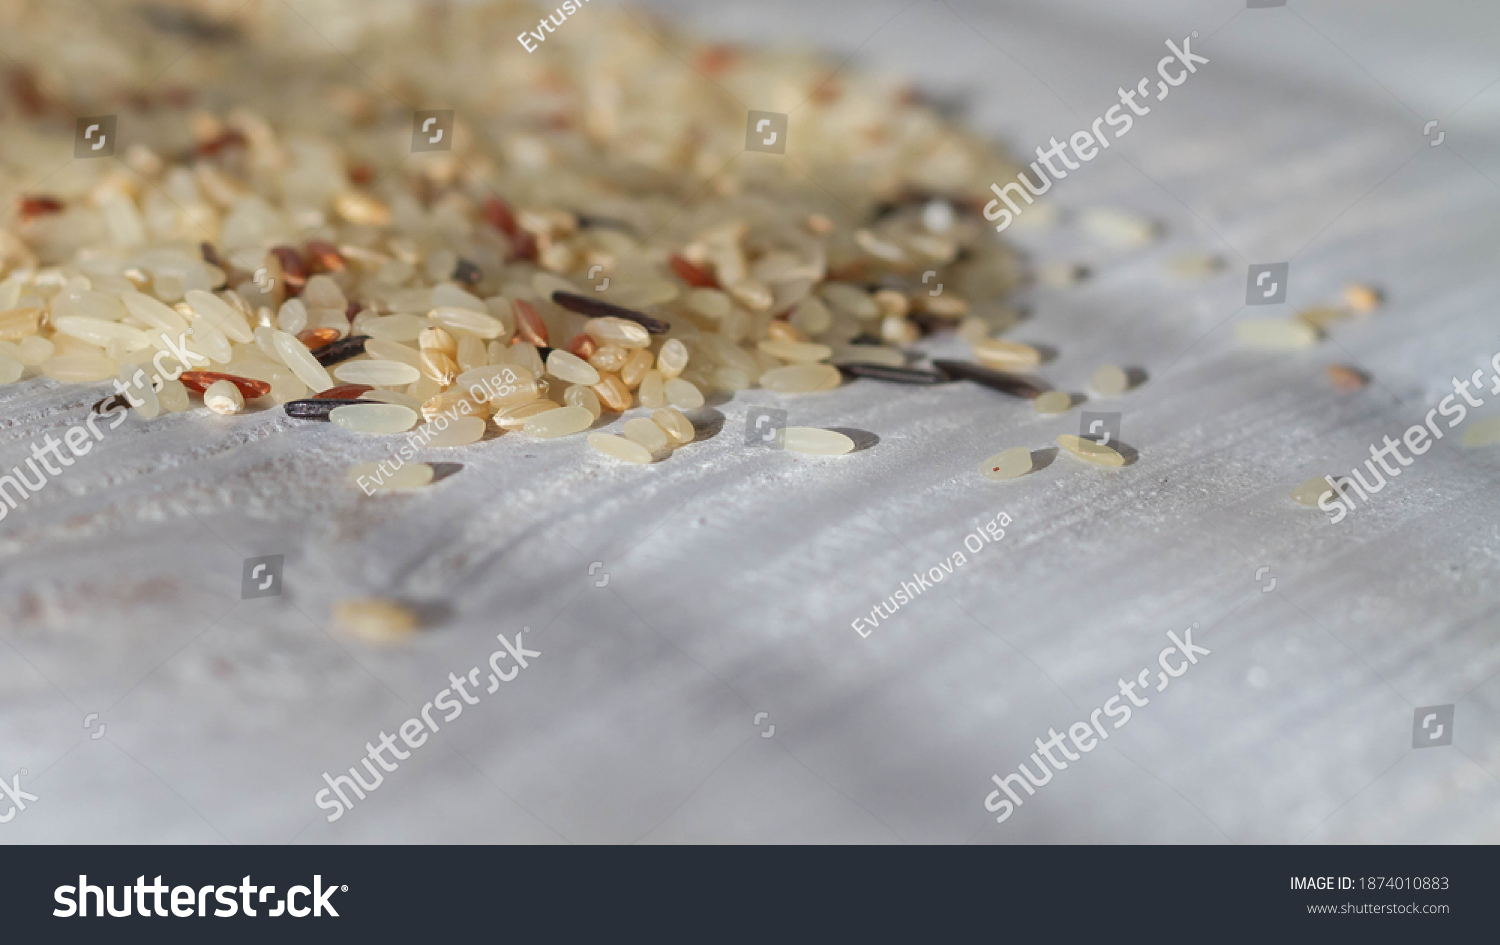 A pile of unboiled fresh rice of various varieties is scattered on the white table. Copy space. #1874010883